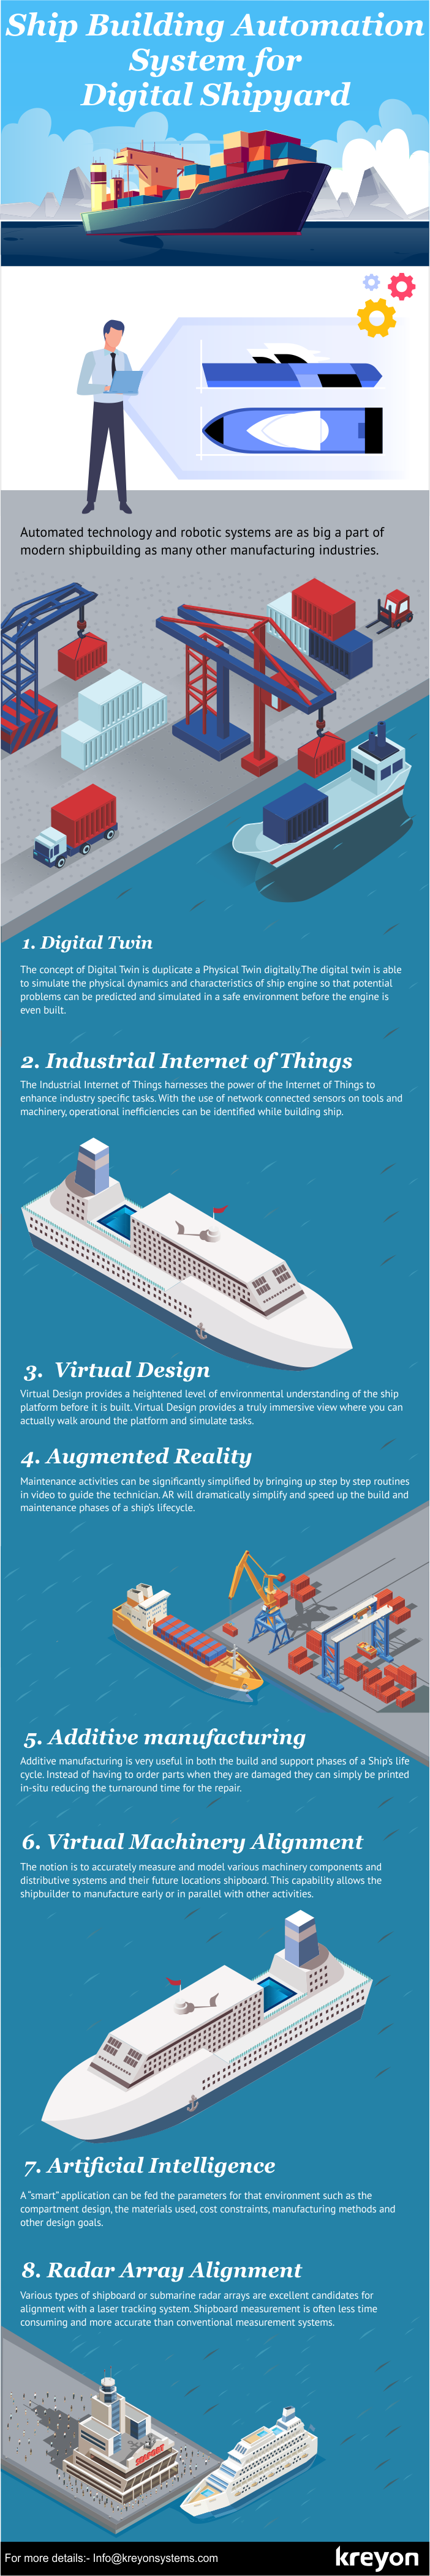 Ship Building Automation System